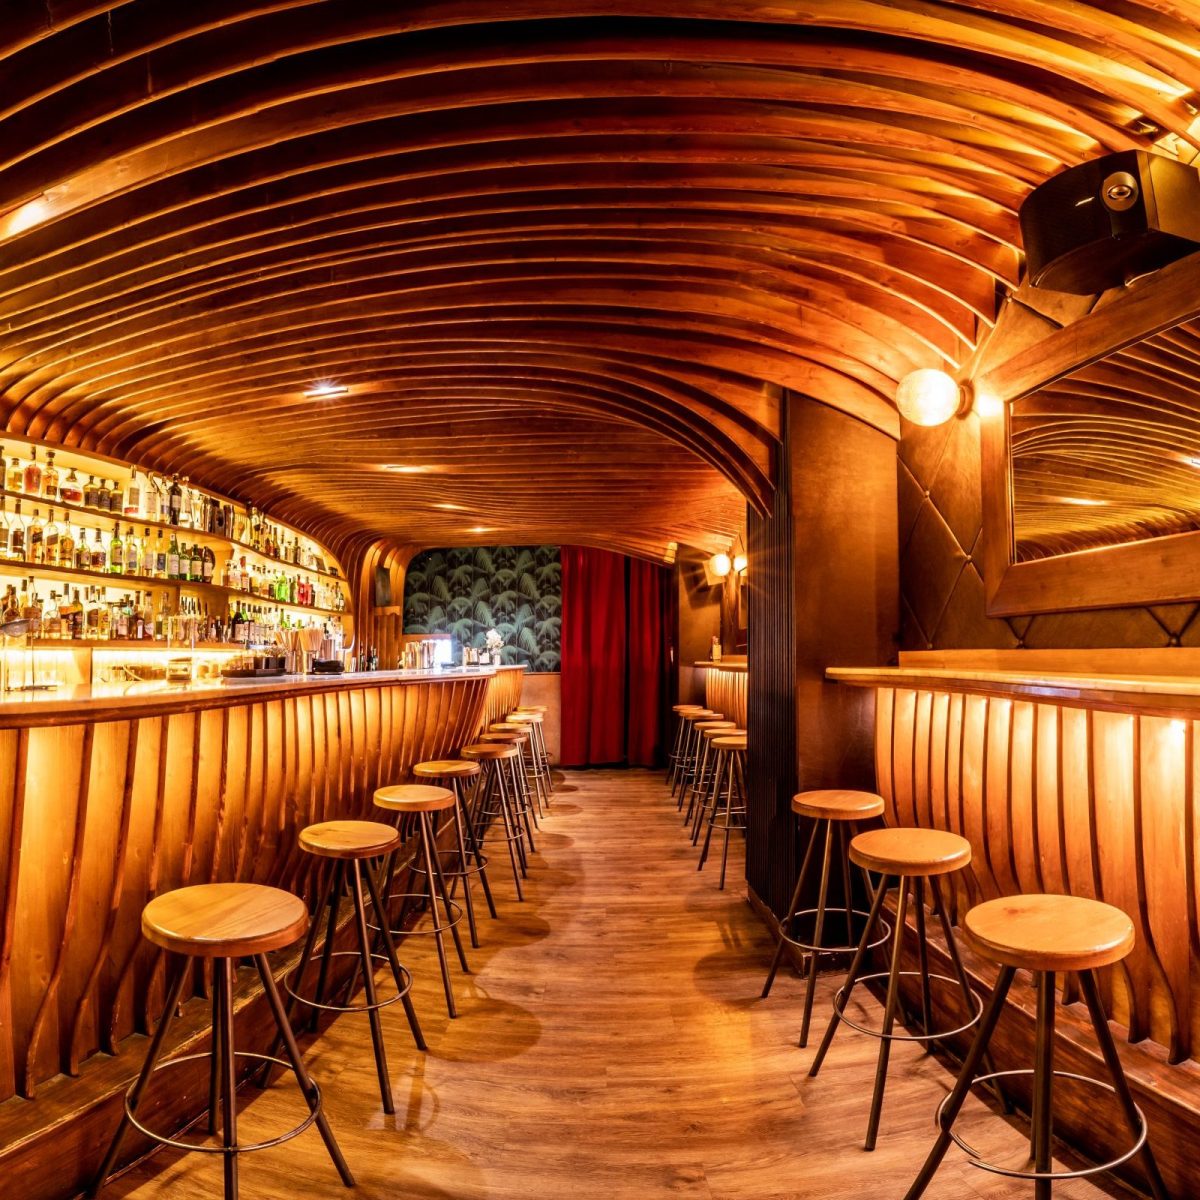 The World’s 50 Best Bars Announces The Debut of a Global “Best Bar Design Award” – COOL HUNTING®